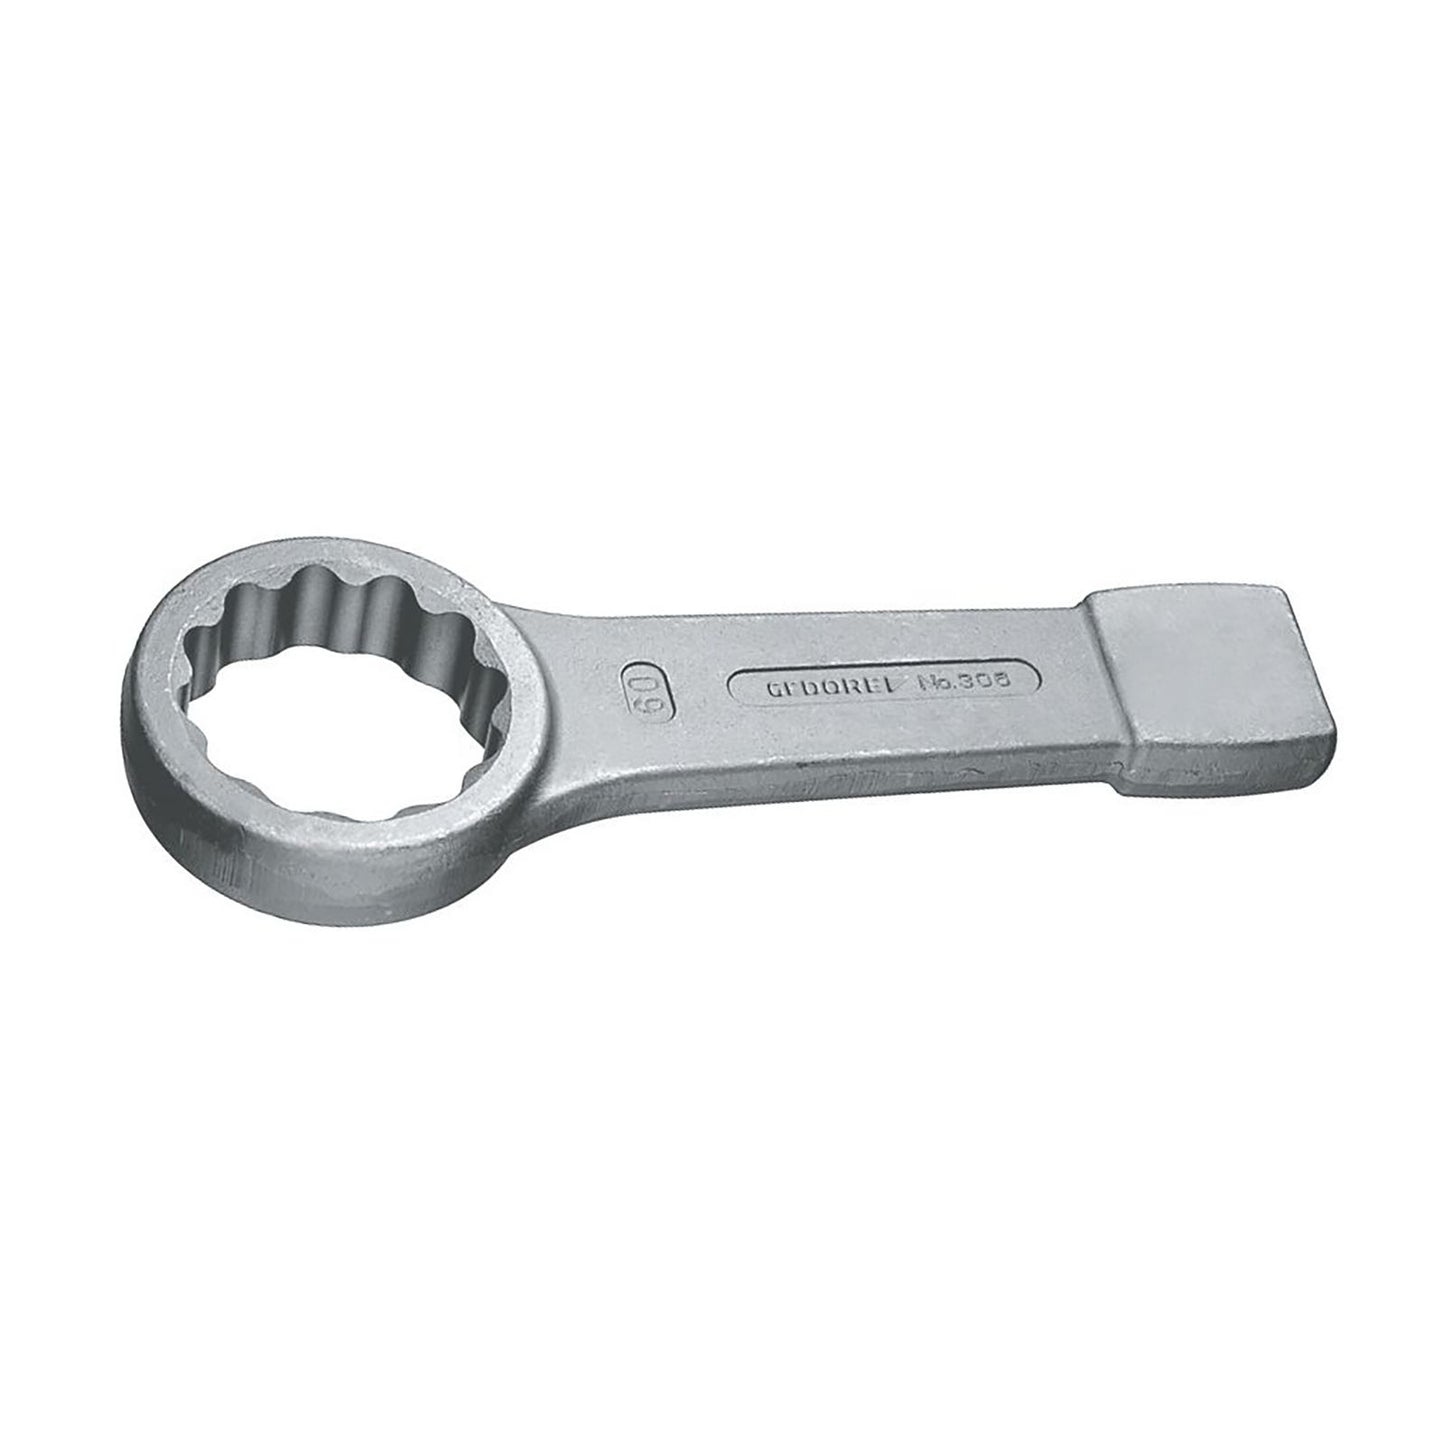 GEDORE 306 46 - Closed Strike Wrench, 46mm (6475780)